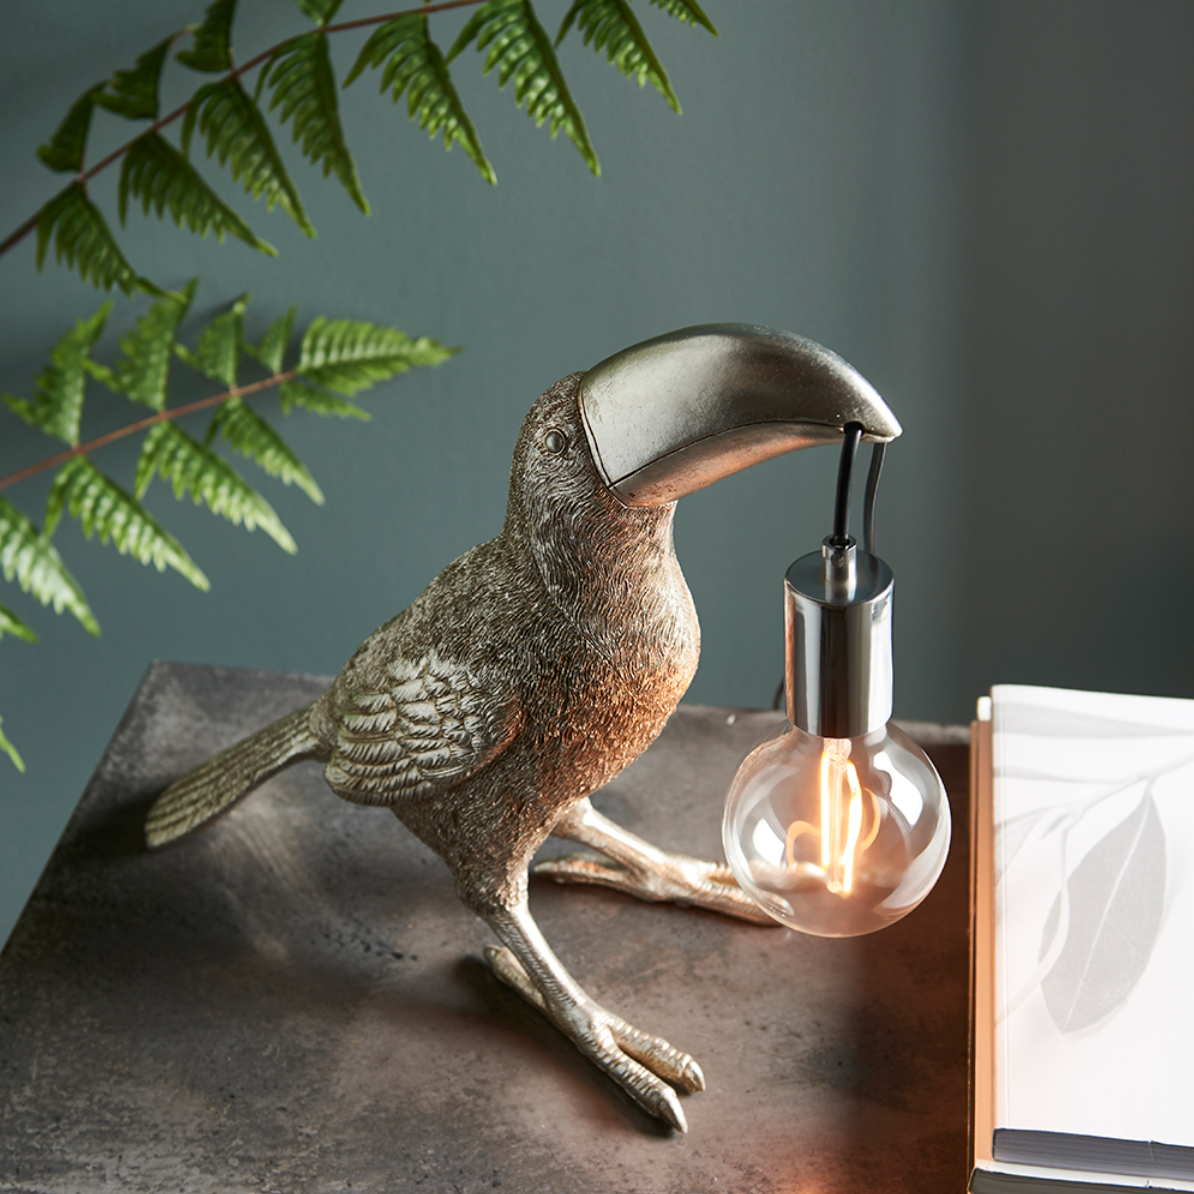 Vintage Silver Toucan Table Light - ID 11656